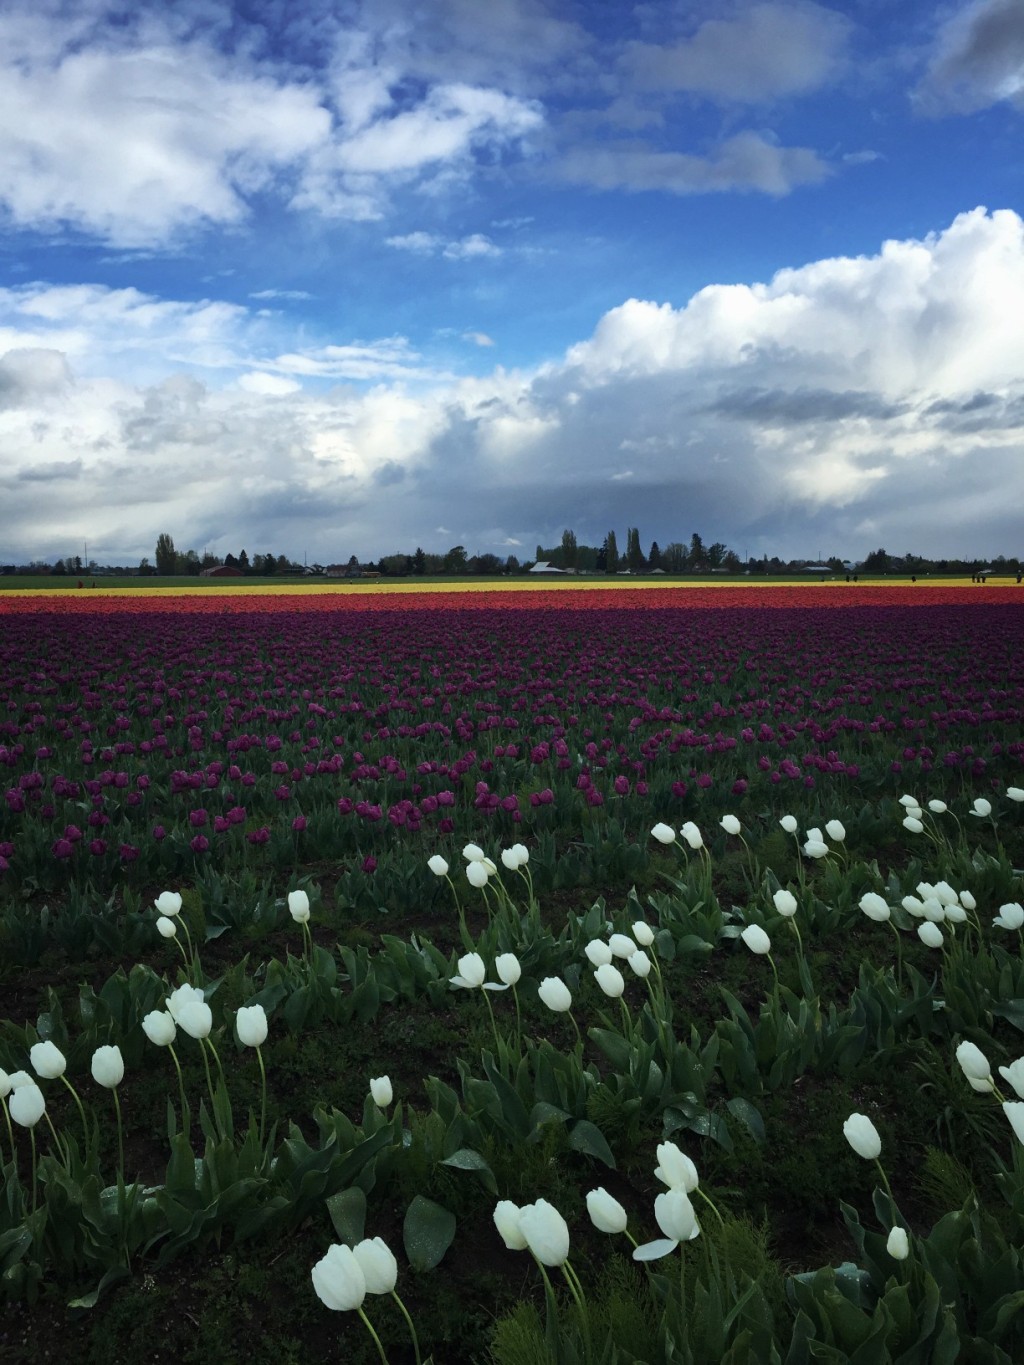 Wordless Wednesday: Tulips and Spring Skies in the Skagit Valley